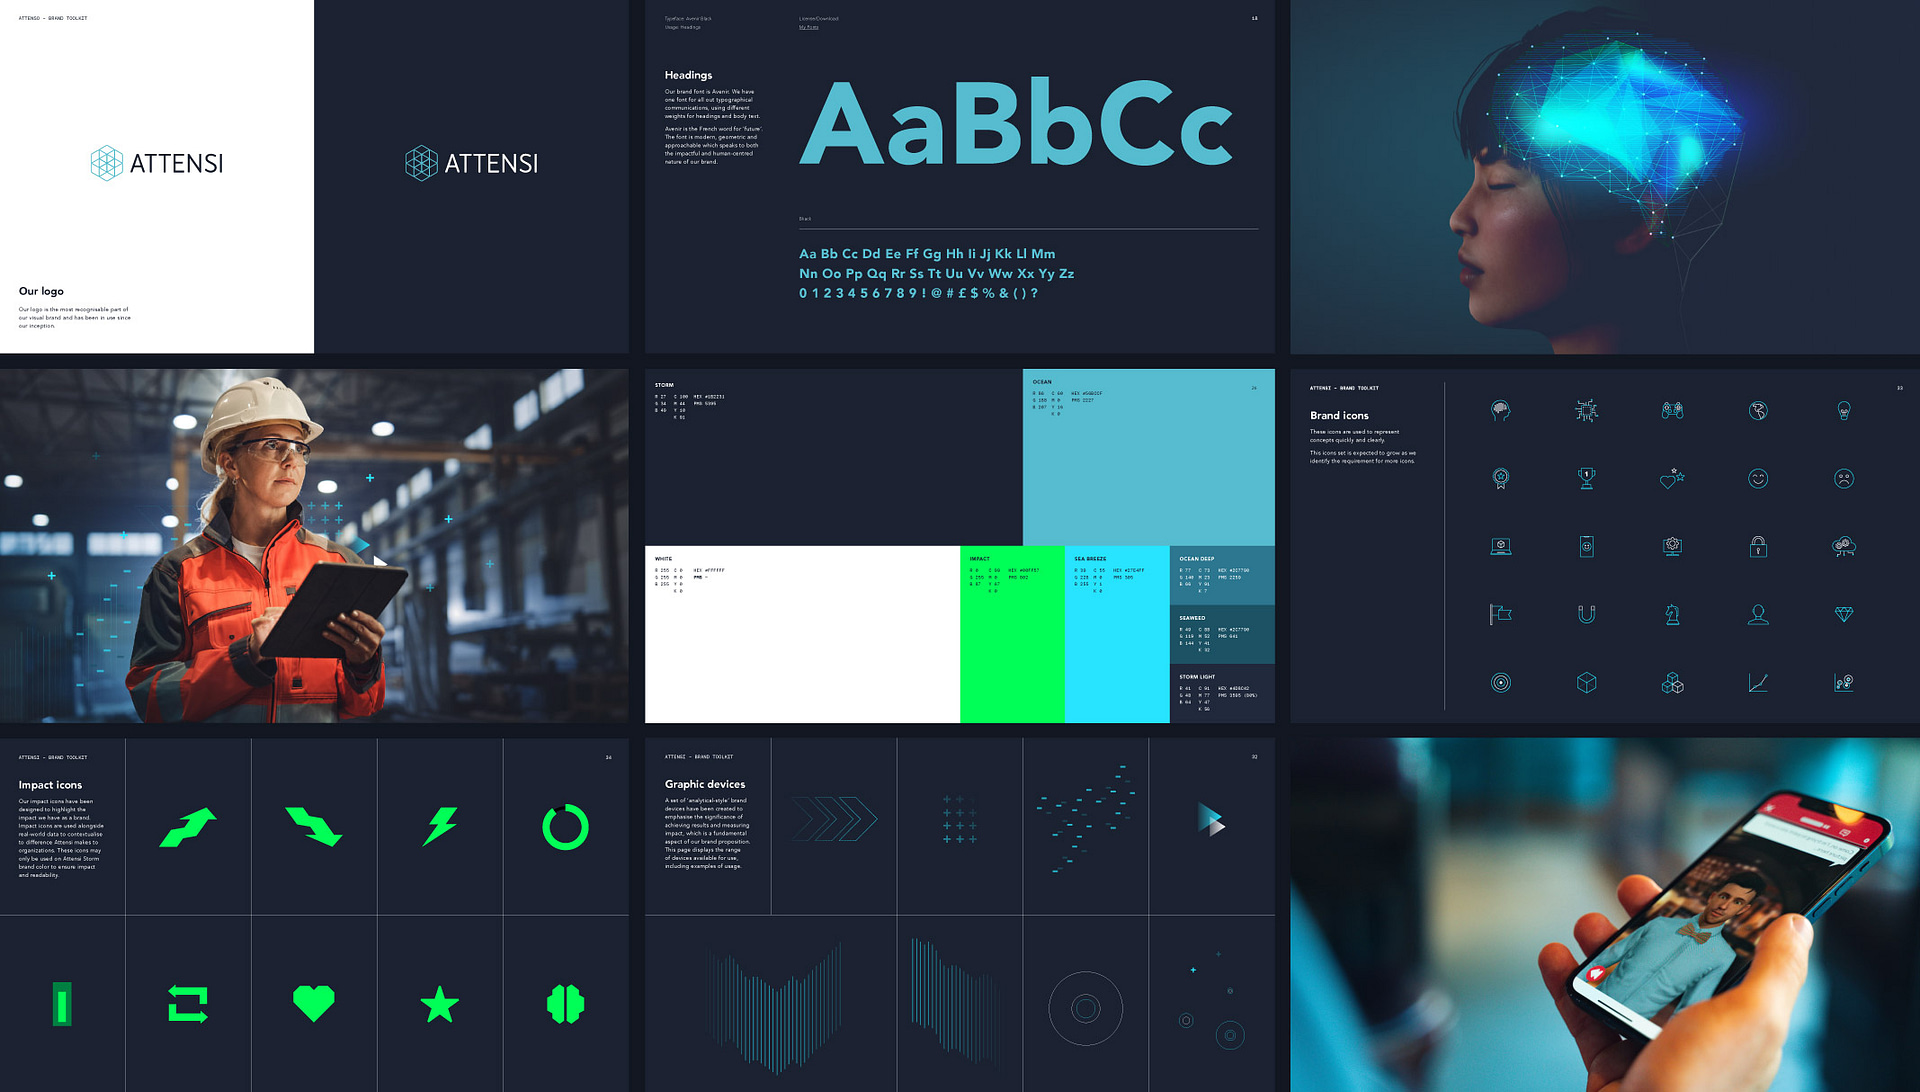 Sample pages from Attensi brand guidelines including logo usage, typography, brand colour palette, imagery, icons and graphic devices.